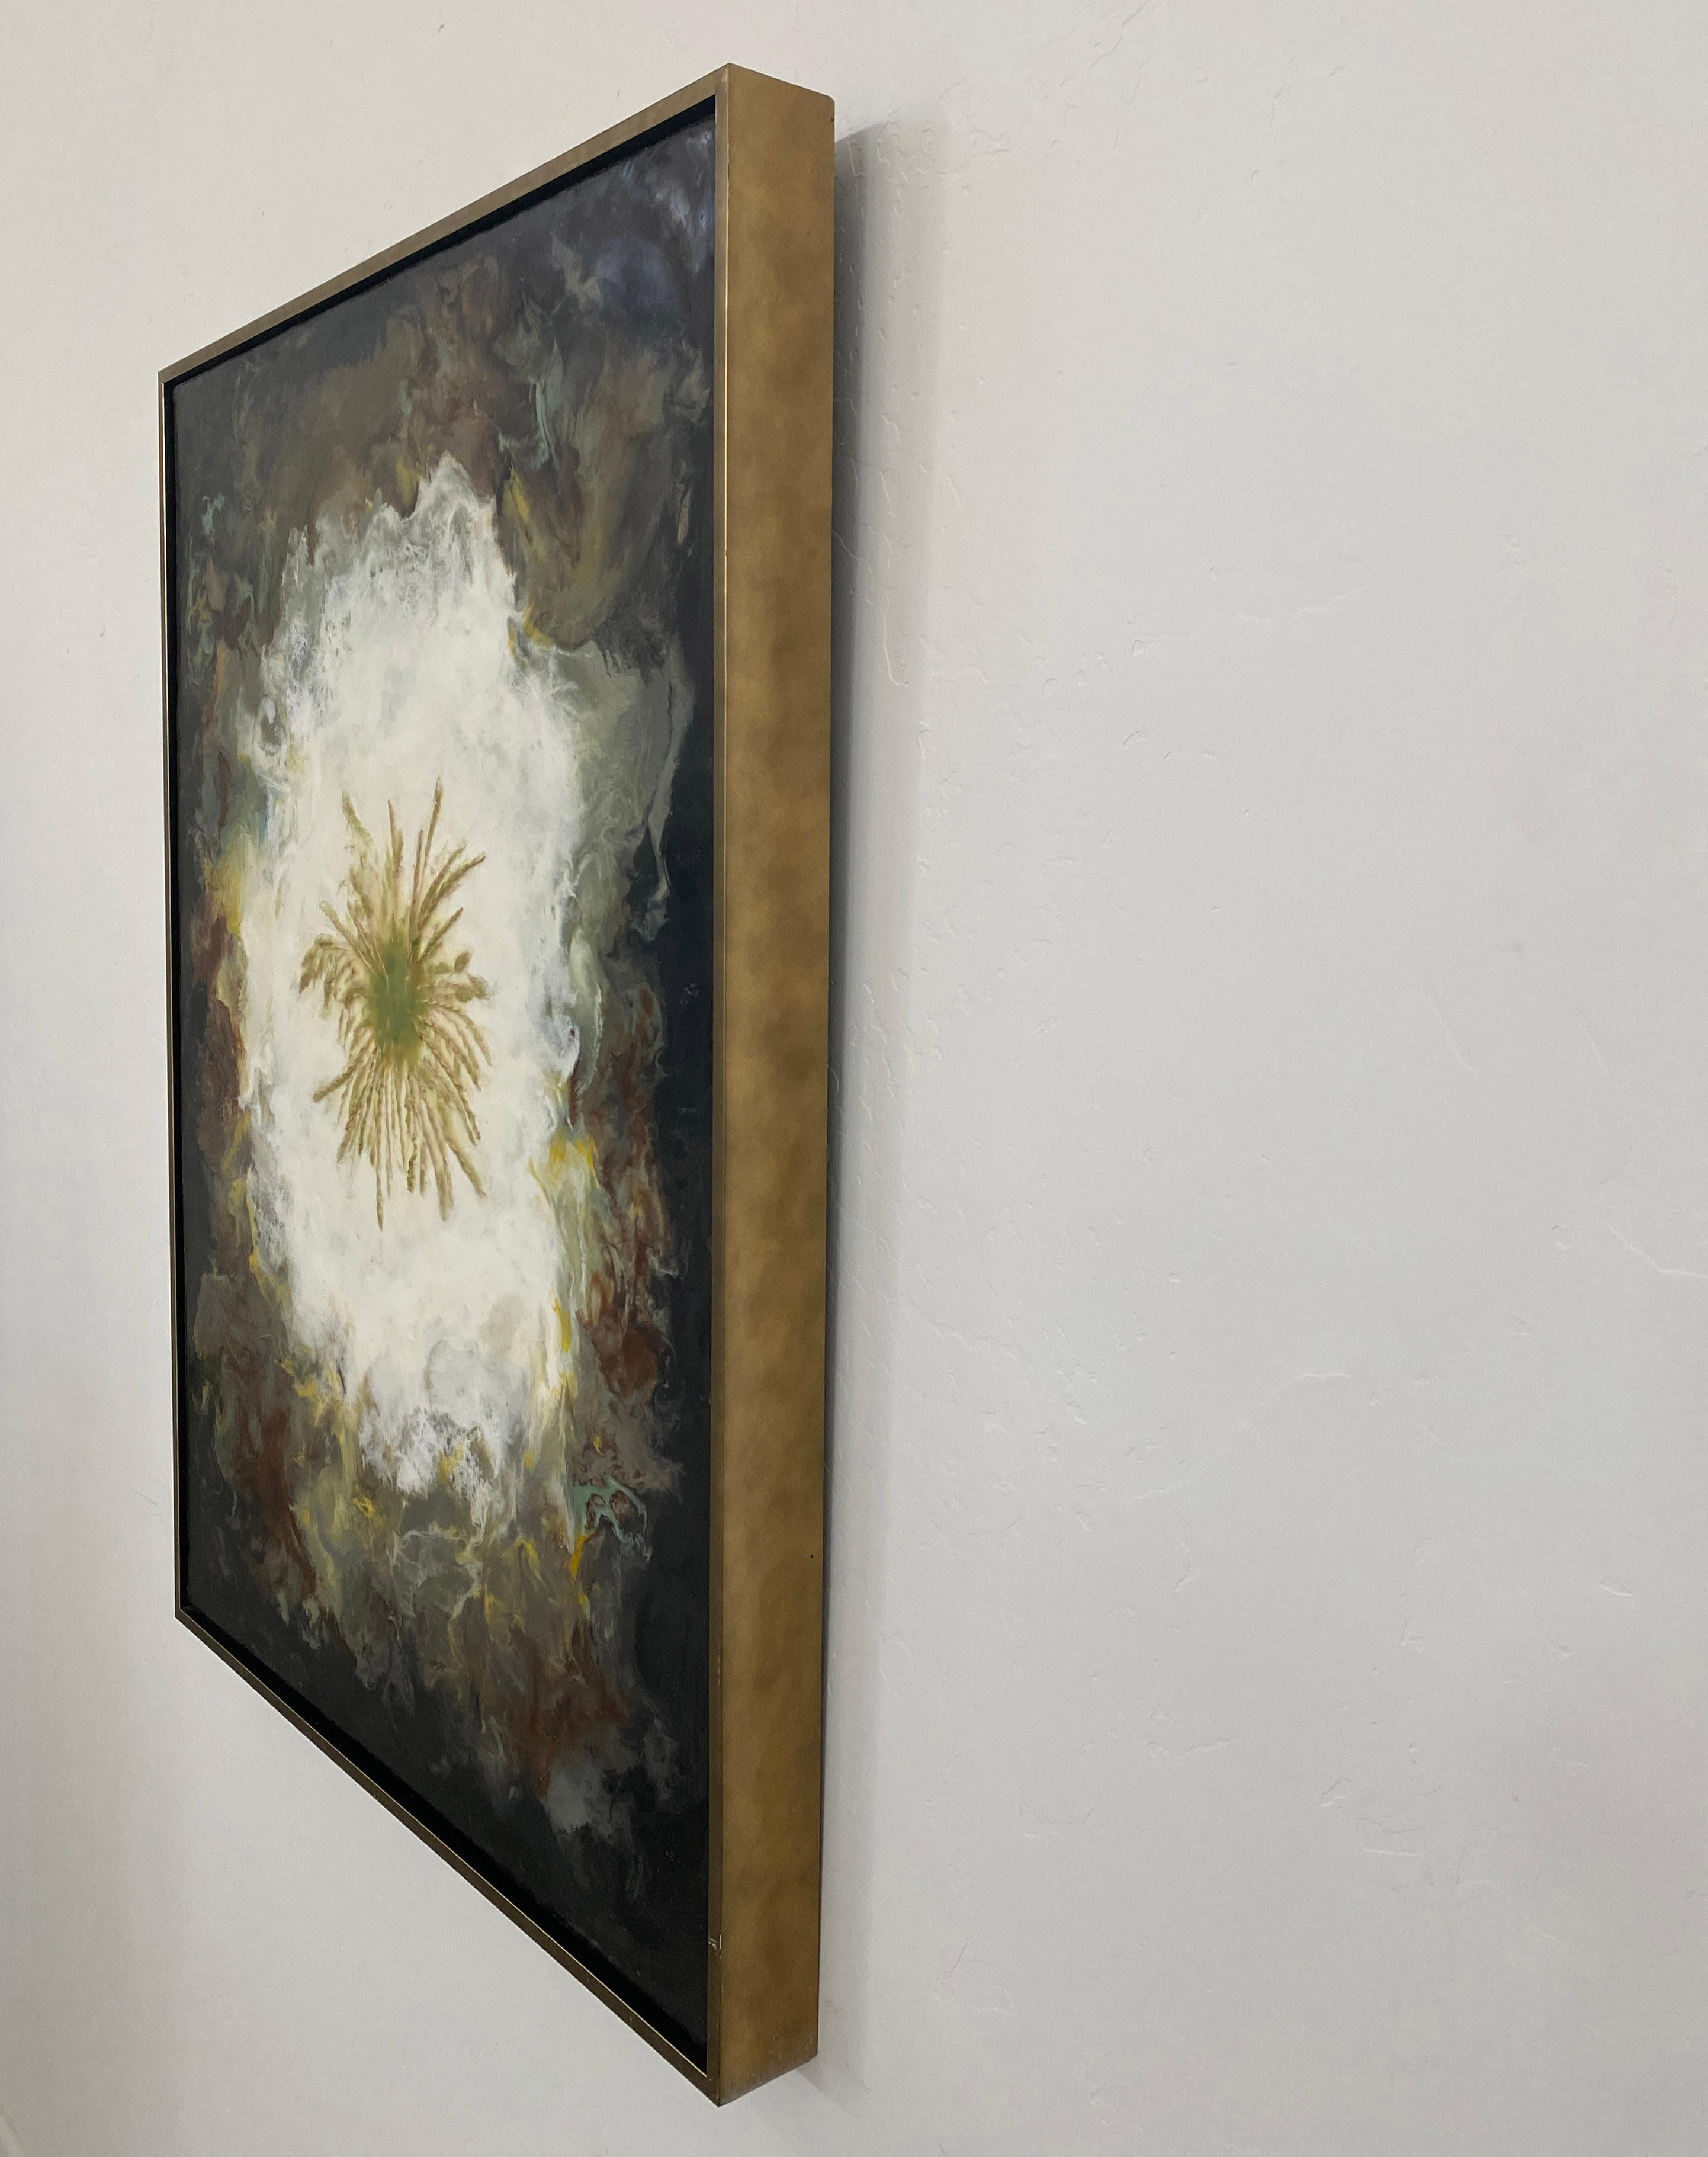 Encaustic is a beeswax-based paint that is applied to a surface while molten and then fused with heat, resulting in a layered, textural effect. The texture of the wax creates interesting patterns and organic shapes within the painting, giving it